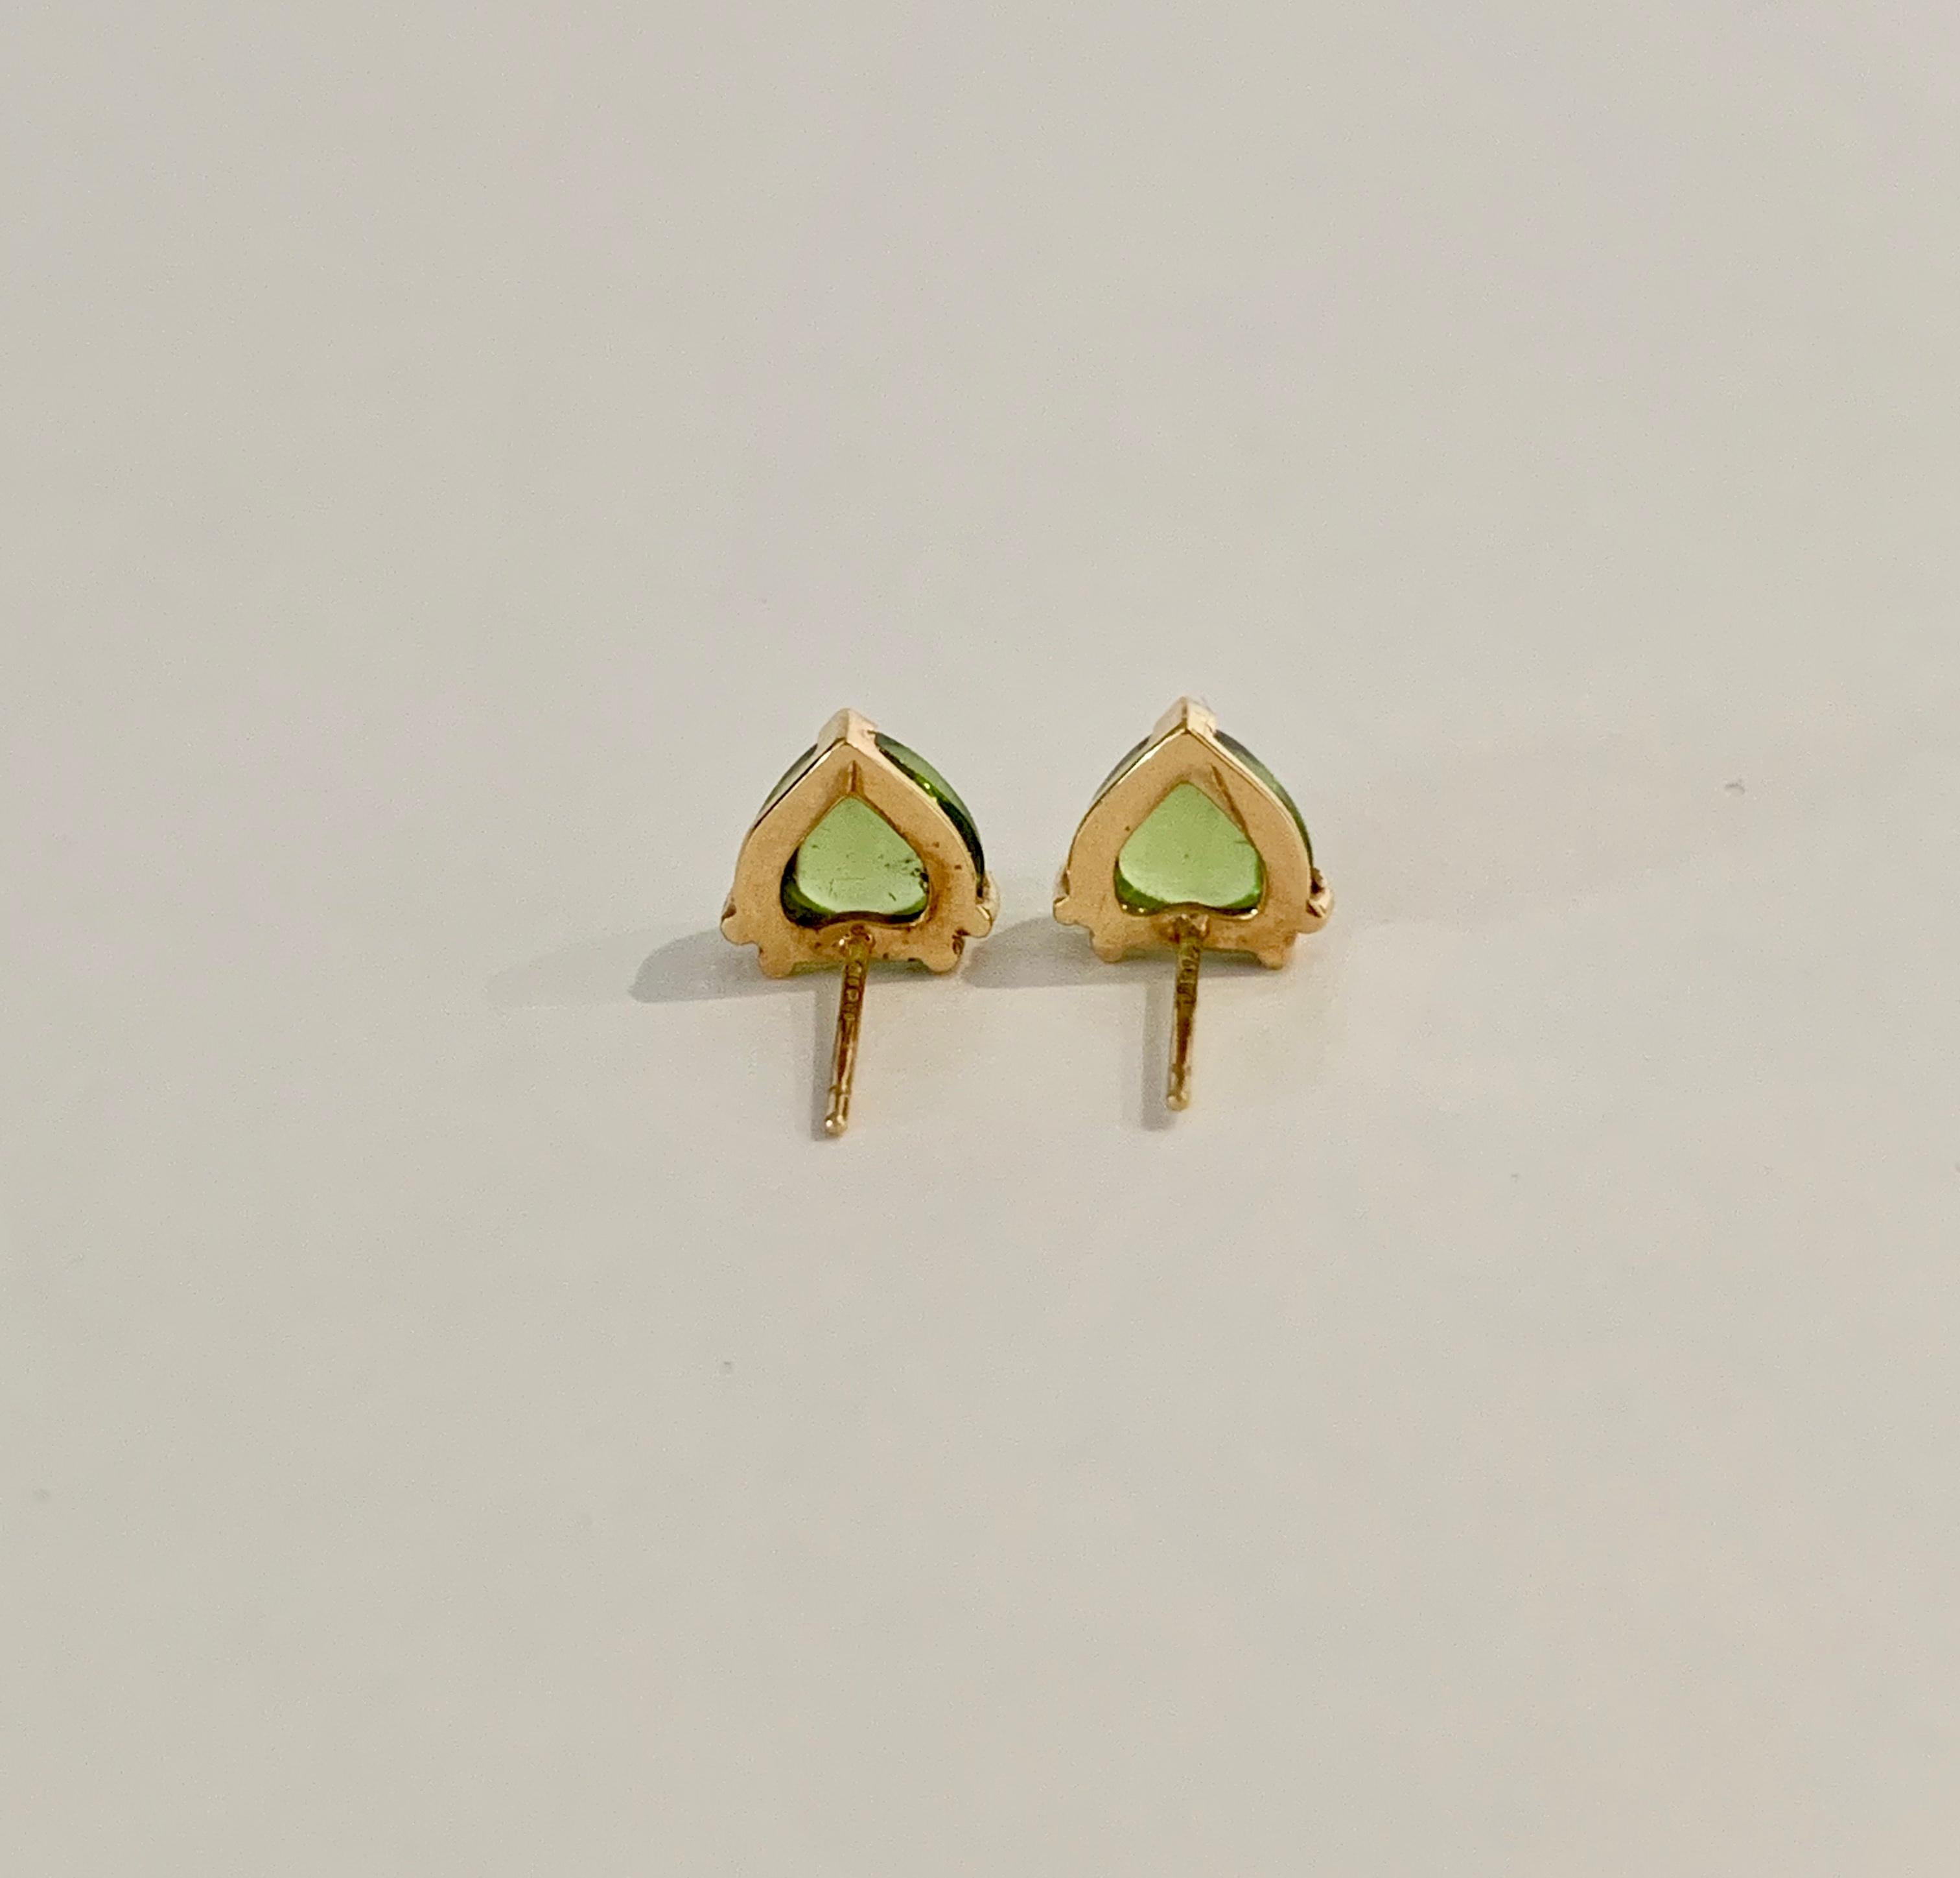 These very pretty Bespoke heart shaped Peridot* stud earrings have been designed with two sets of double claws and a rub over design at the tip.  A CAD was used to make this design especially for these heart shaped cabochon* stones,  also making the